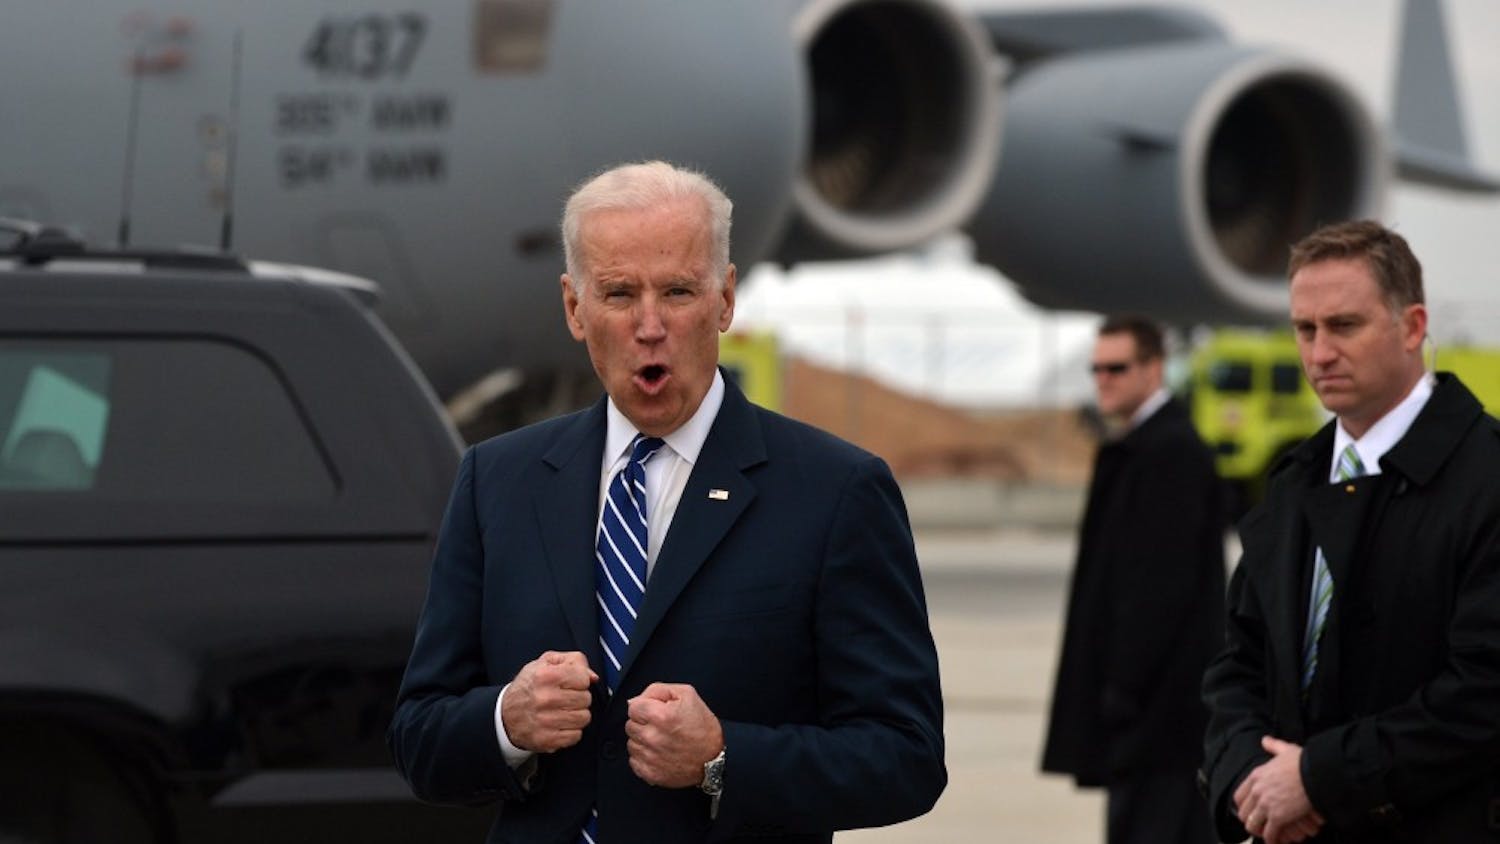 Vice President Joe Biden jokes with the press about how cold it is in Atlanta, Tuesday morning, March 4, 2014. (Brant Sanderlin/Atlanta Journal-Constitution/MCT)